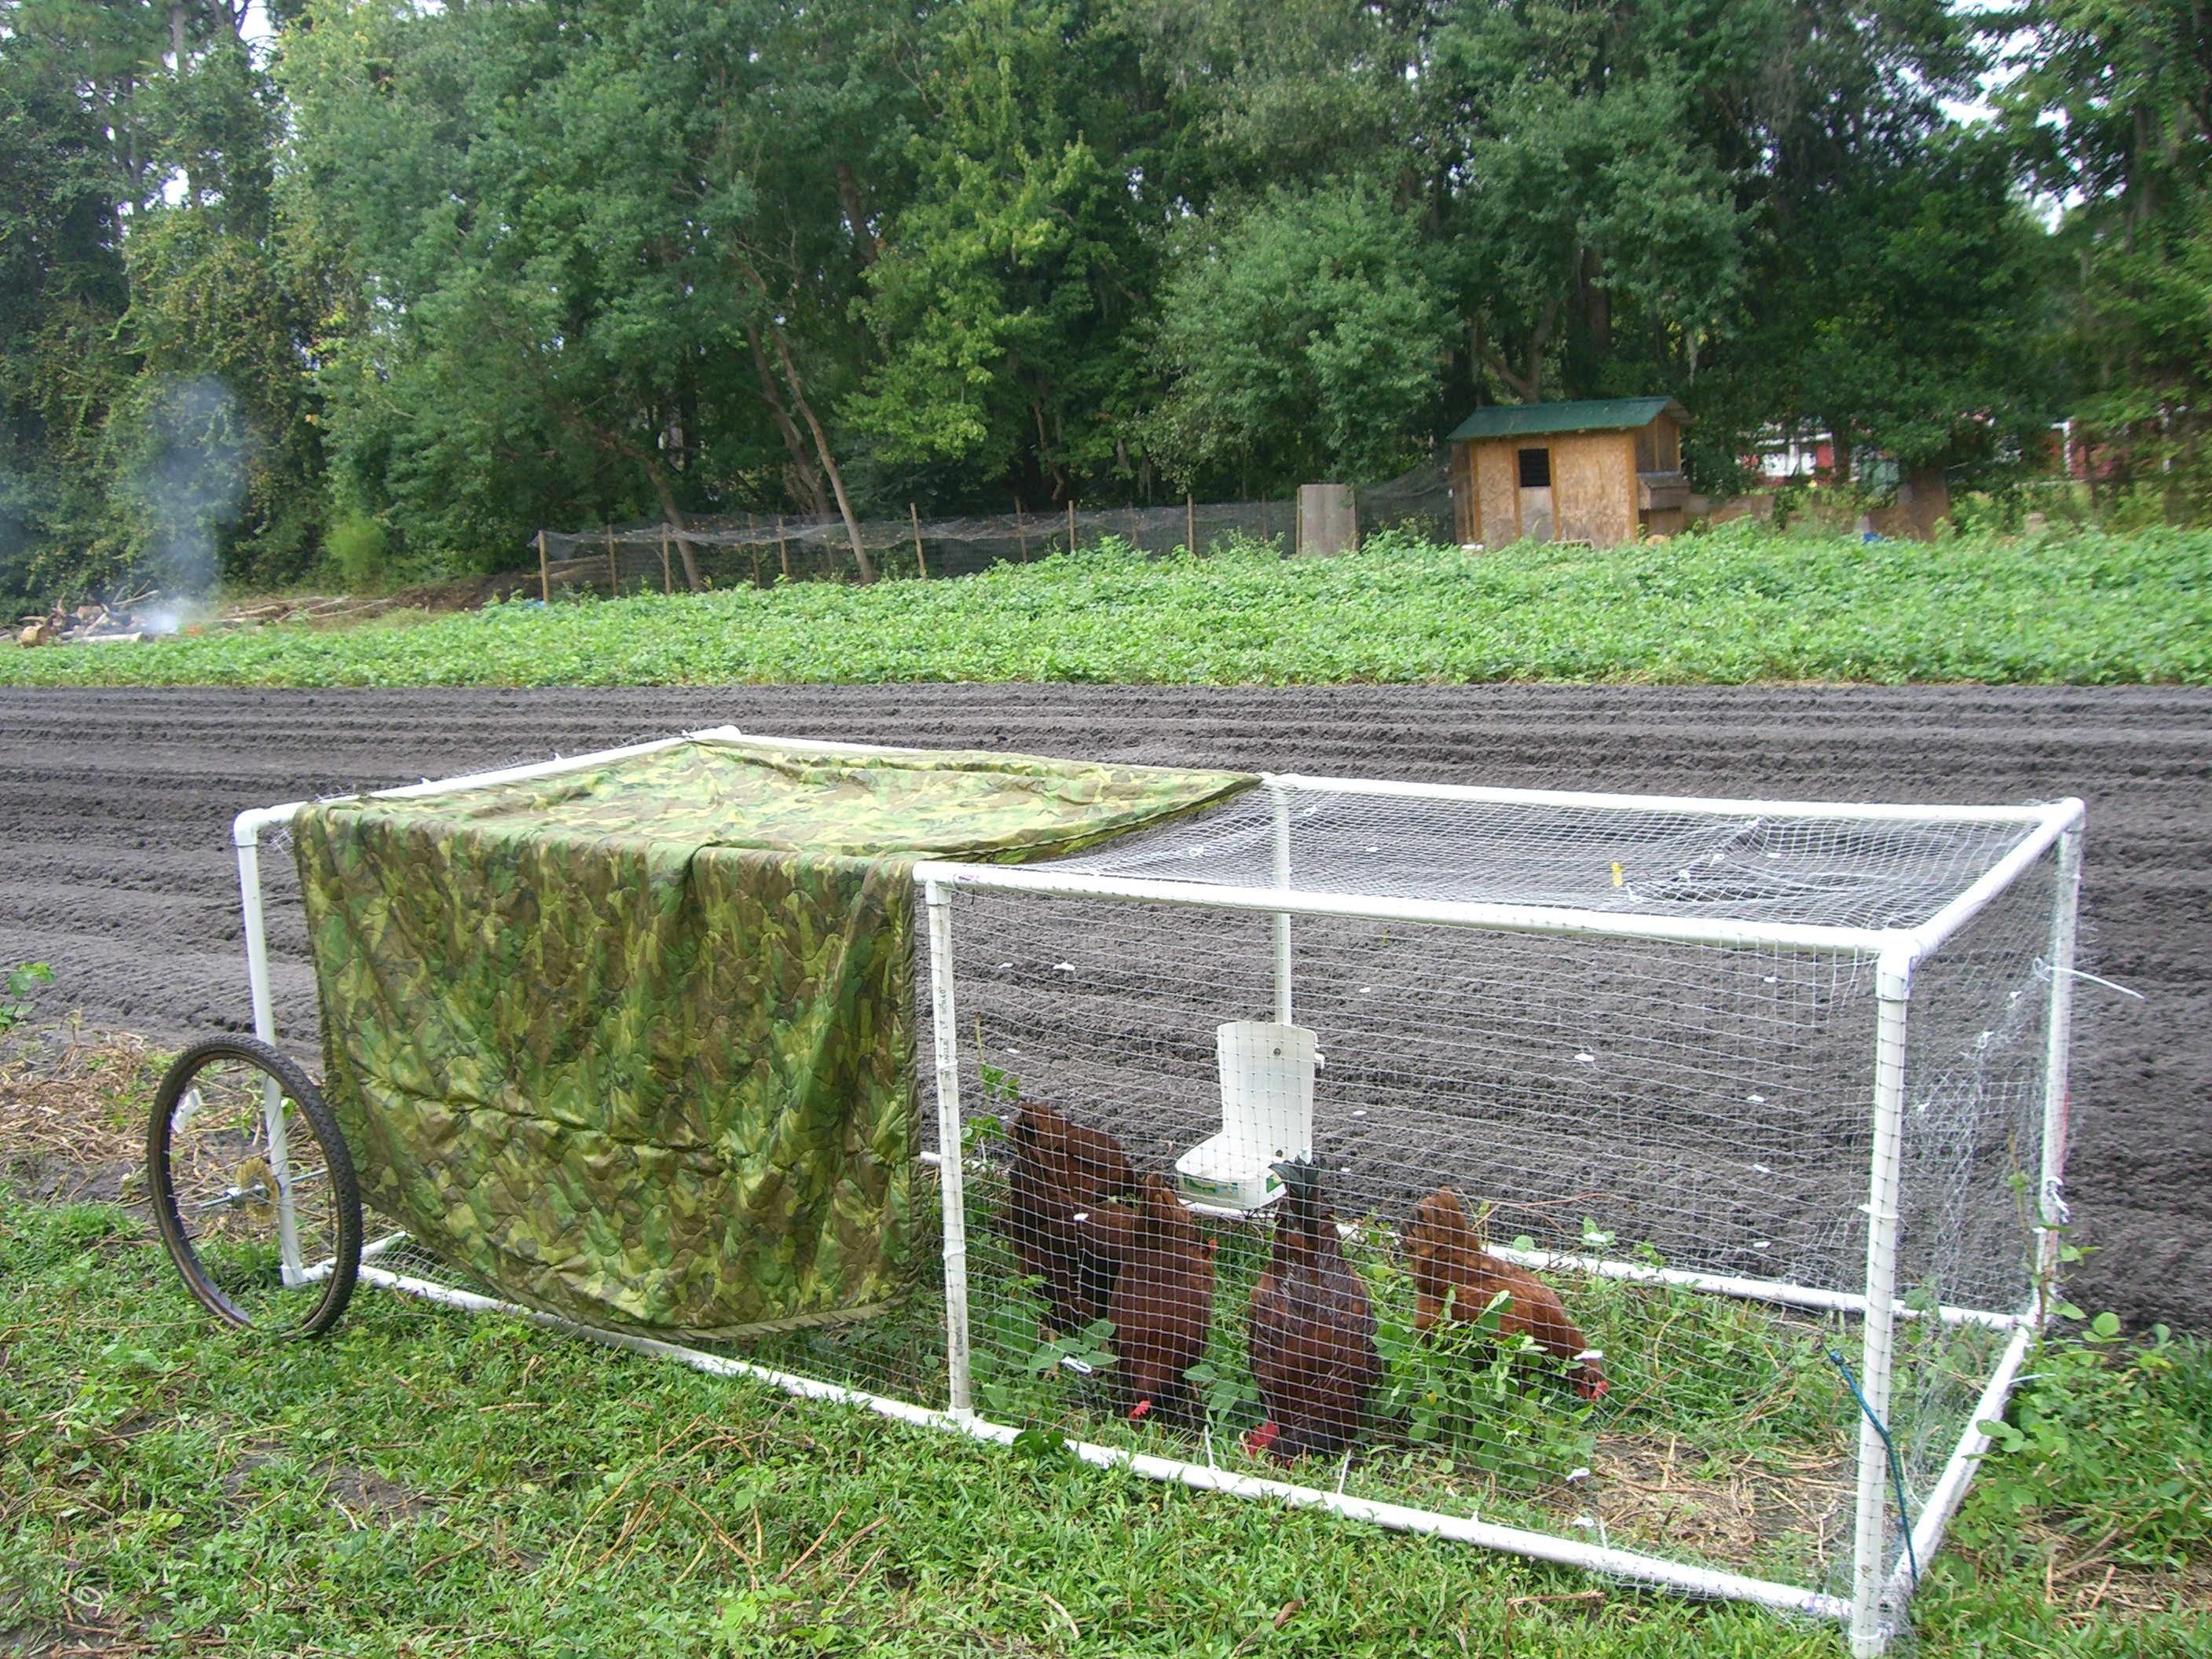 The Chicken Tractor | Down to Earth Farm, Jacksonville